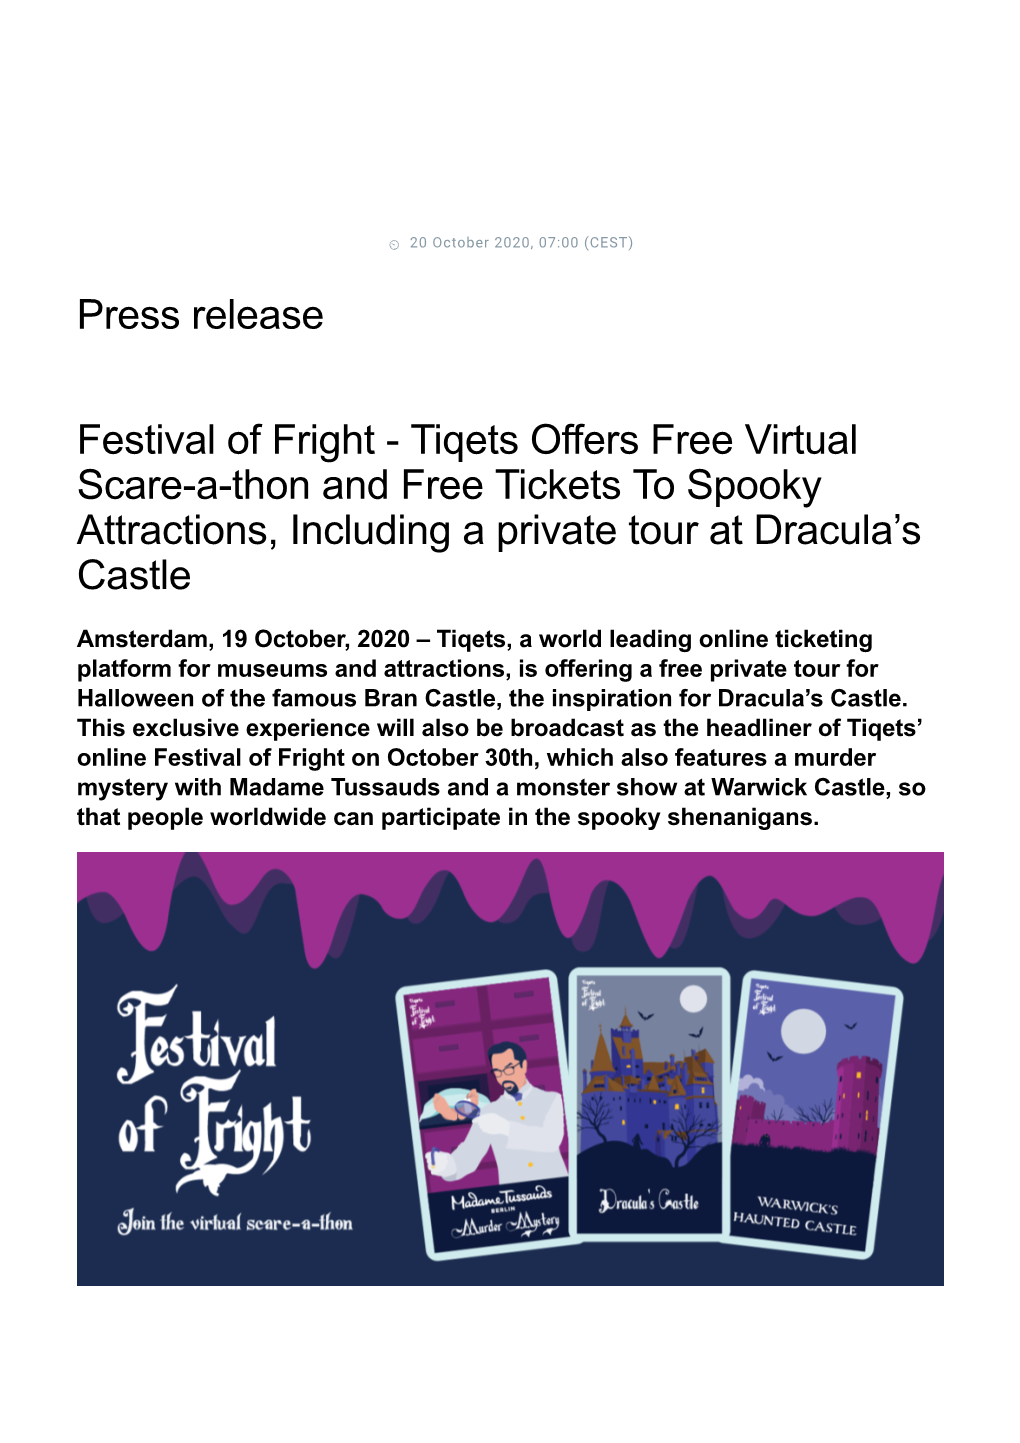 Festival of Fright - Tiqets Offers Free Virtual Scare-A-Thon and Free Tickets to Spooky Attractions, Including a Private Tour at Dracula’S Castle